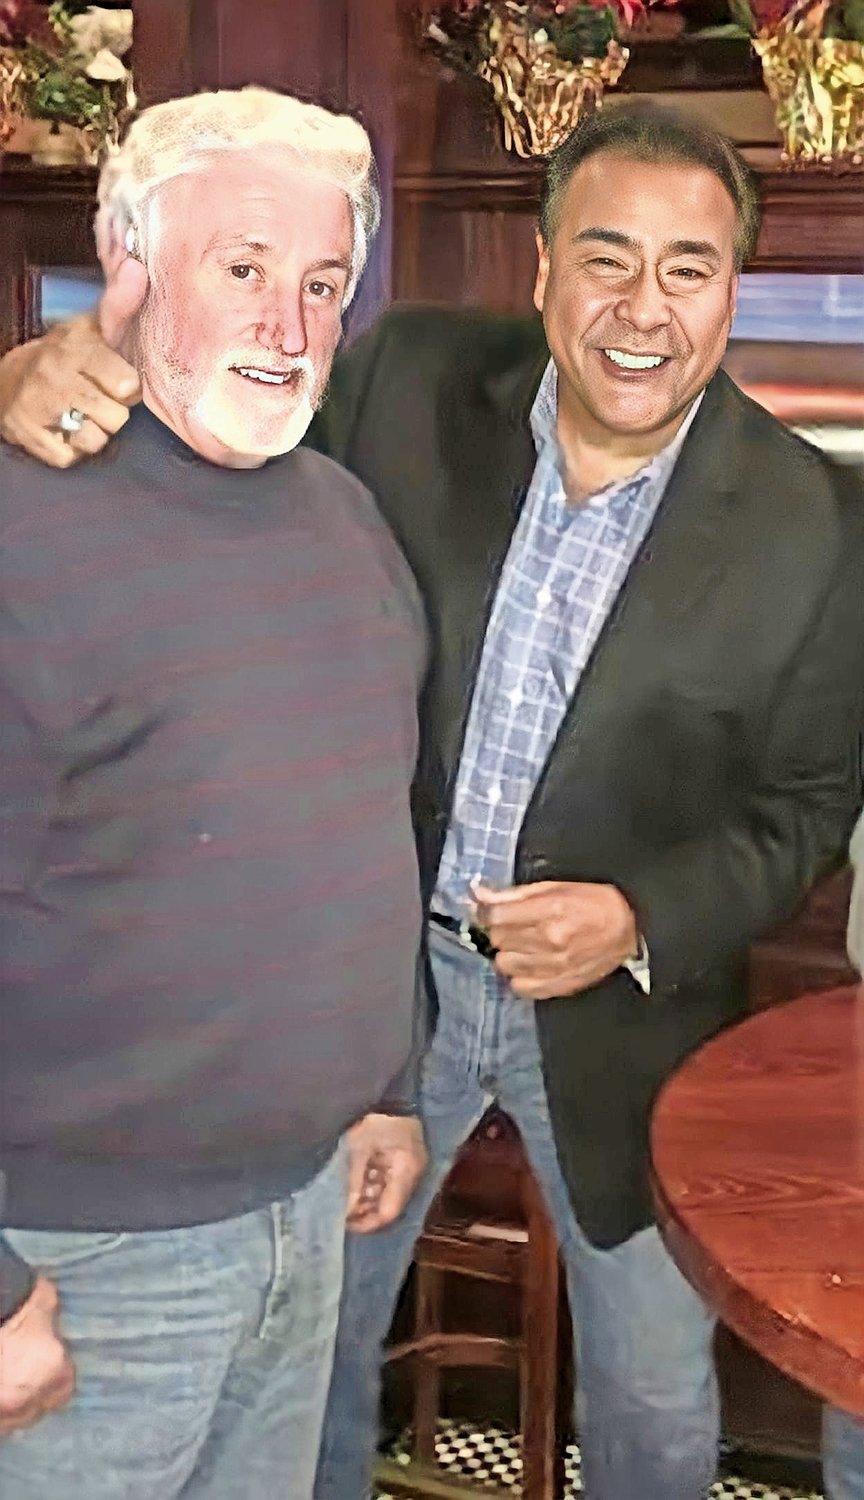 Jim McQuade with John Quiñones of ABC’s ‘What Would You Do?’ The show made use of the restaurant several times.